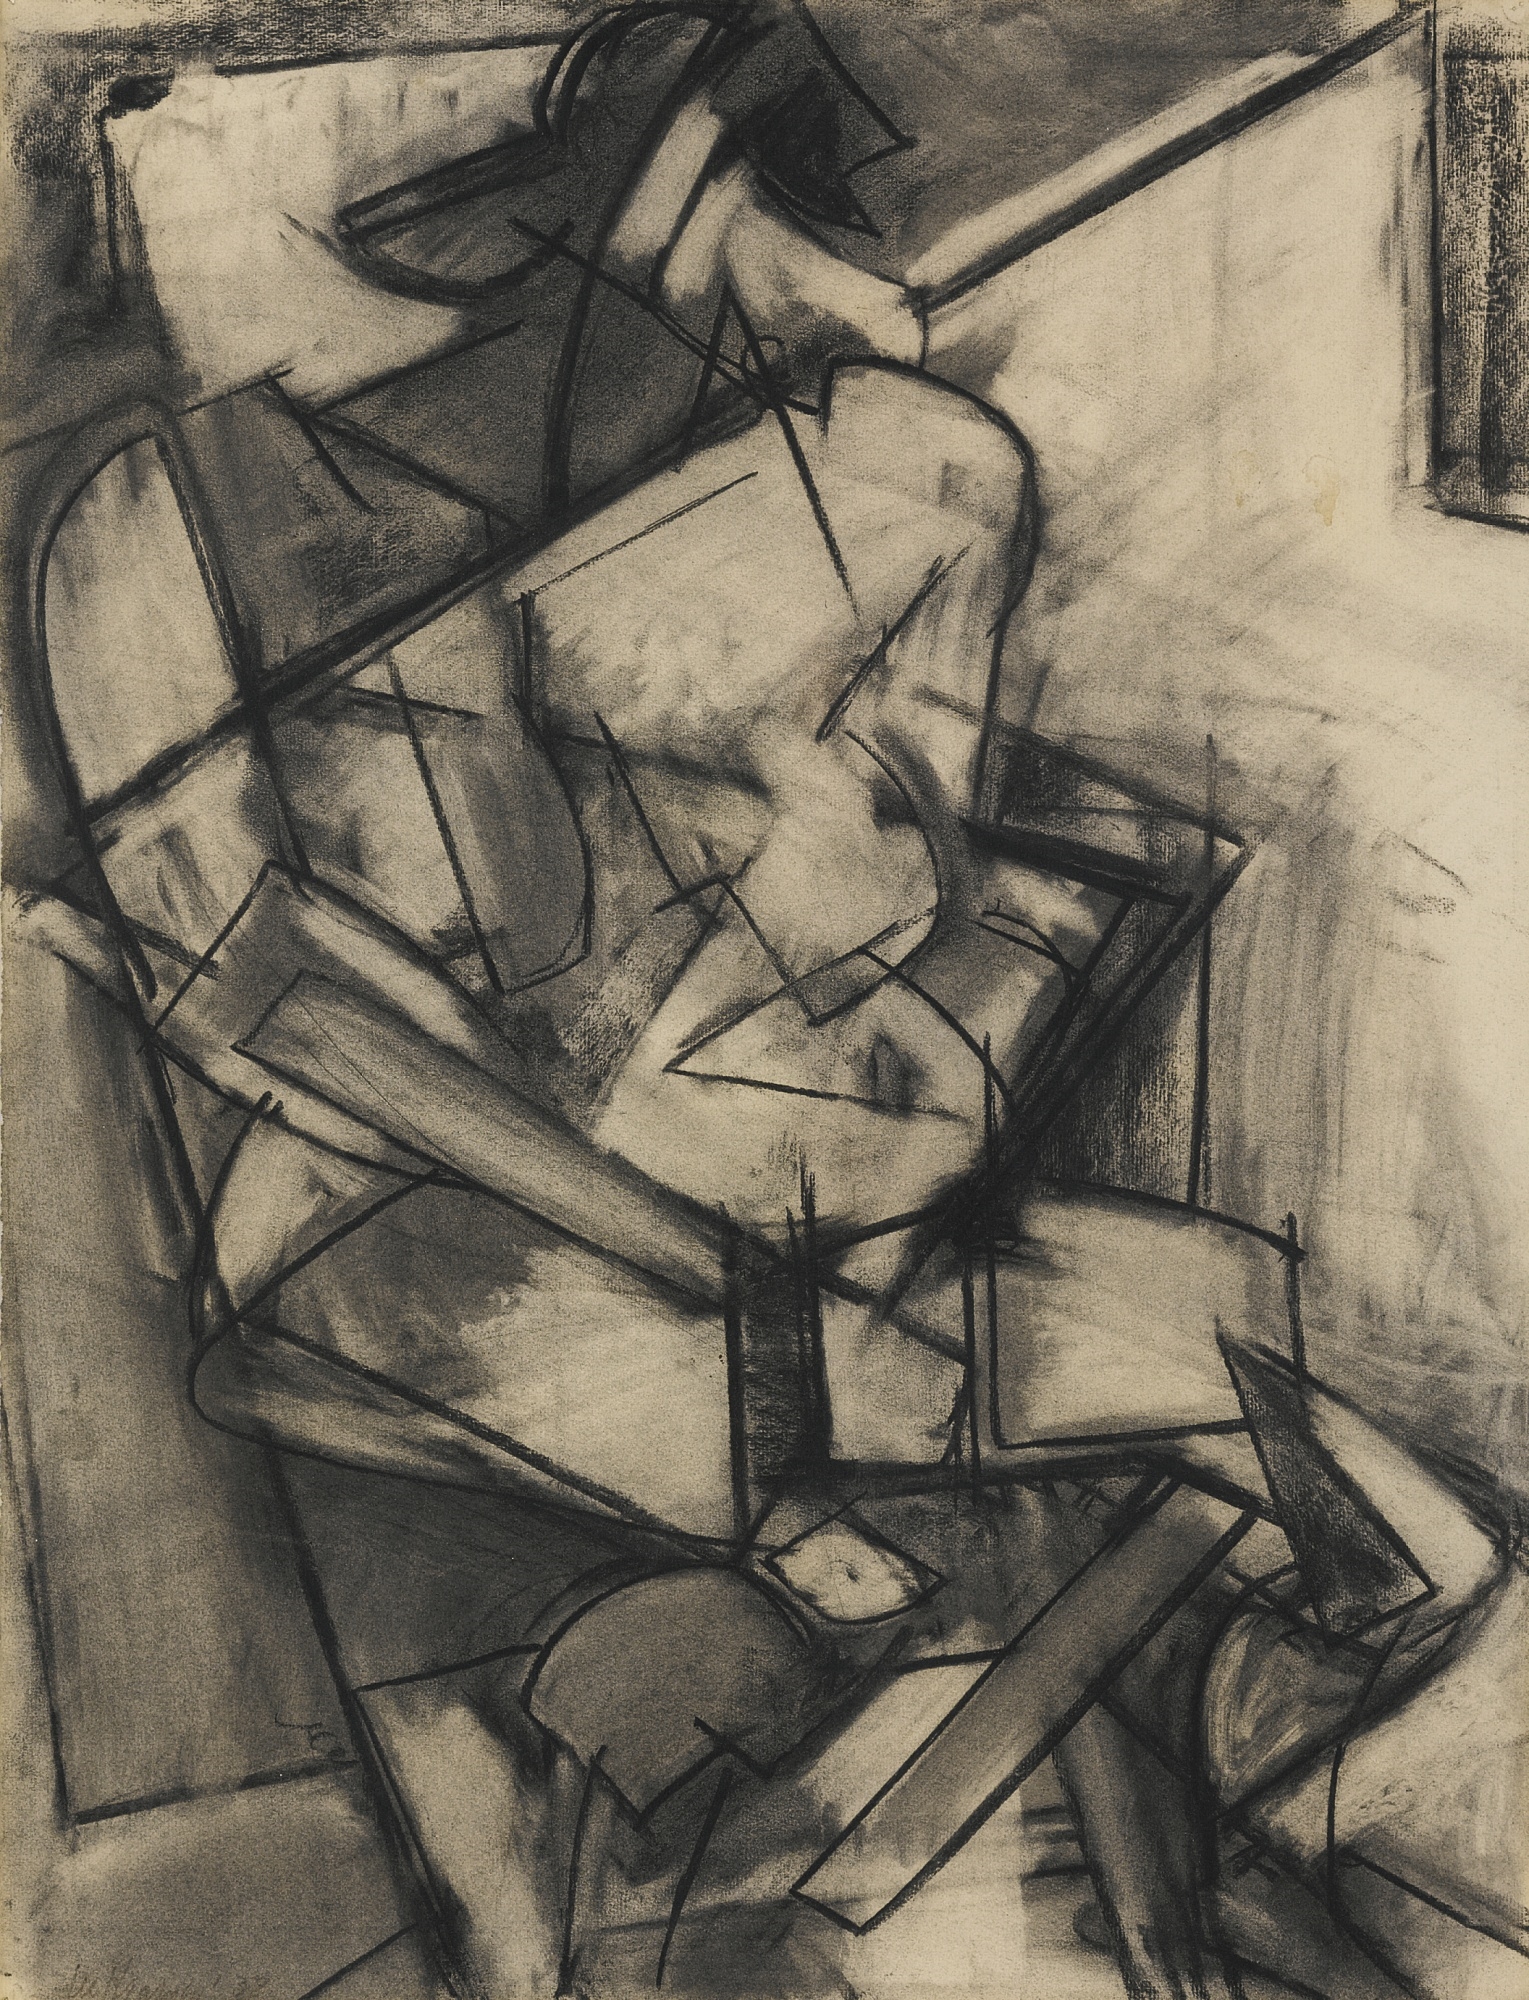 Artwork by Lee Krasner, NUDE STUDY FROM LIFE, Made of charcoal on paper.